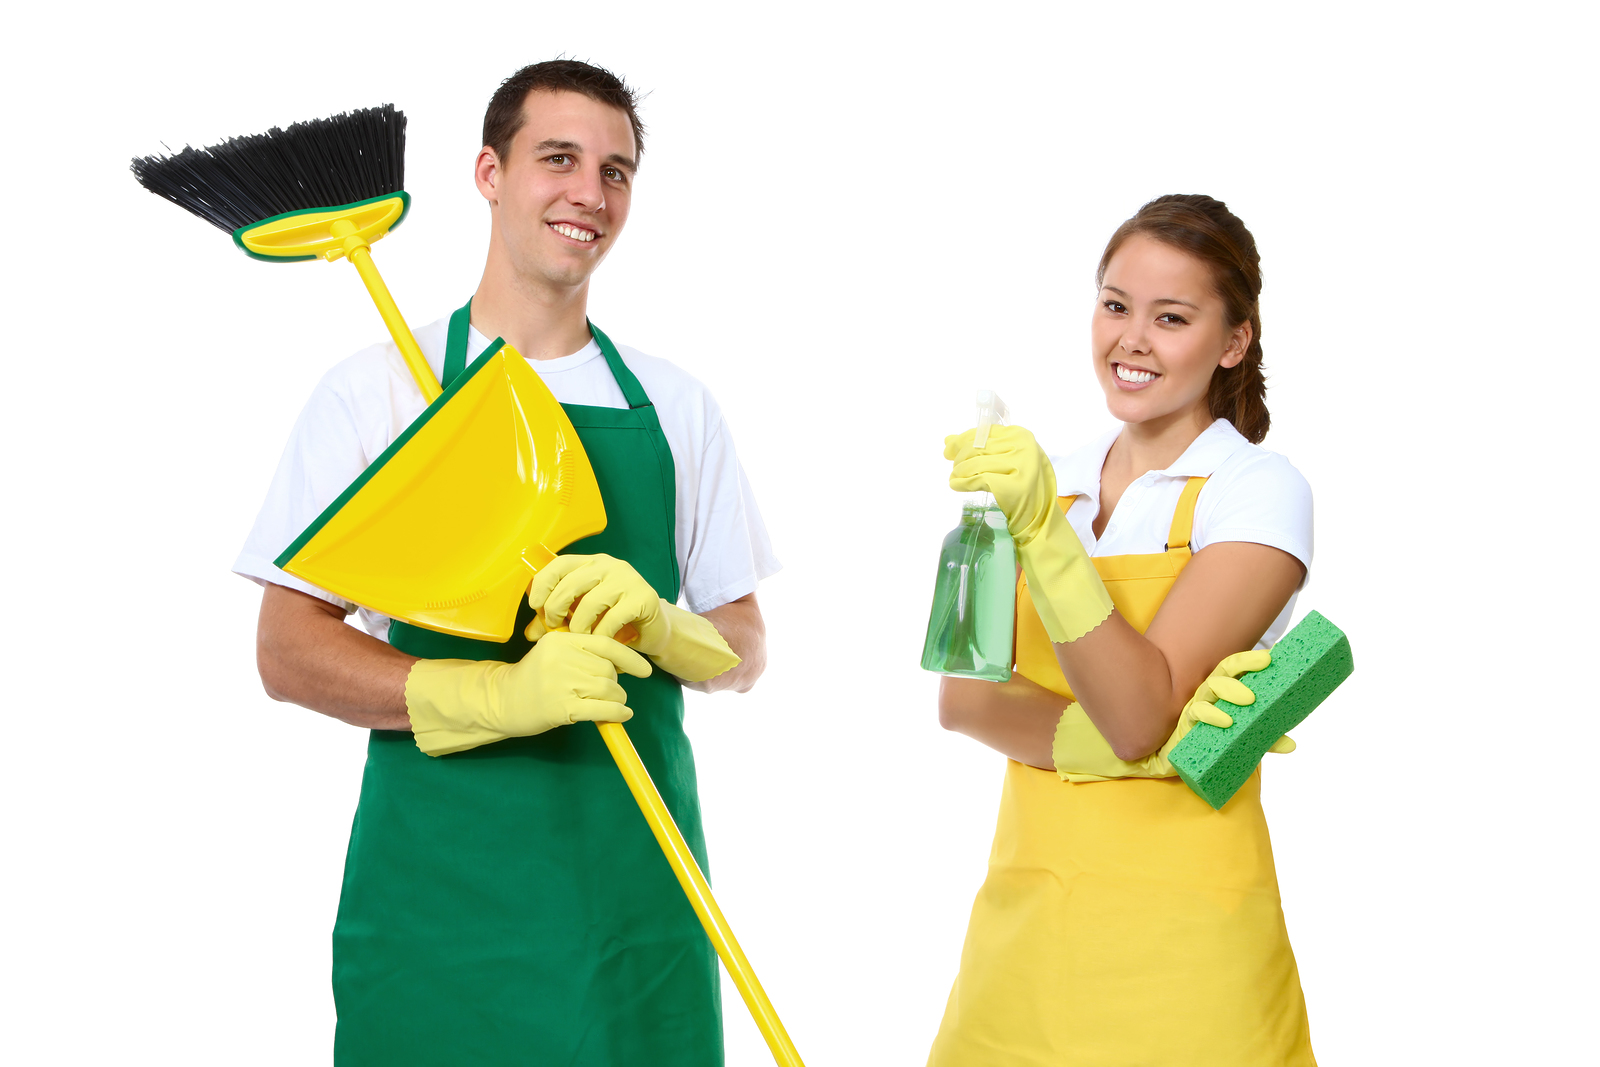 zdroj: http://cleaning-company-leads.com/wp-content/uploads/2010/04/bigstockphoto_Man_And_Woman_Cleaning_4270403.jpg